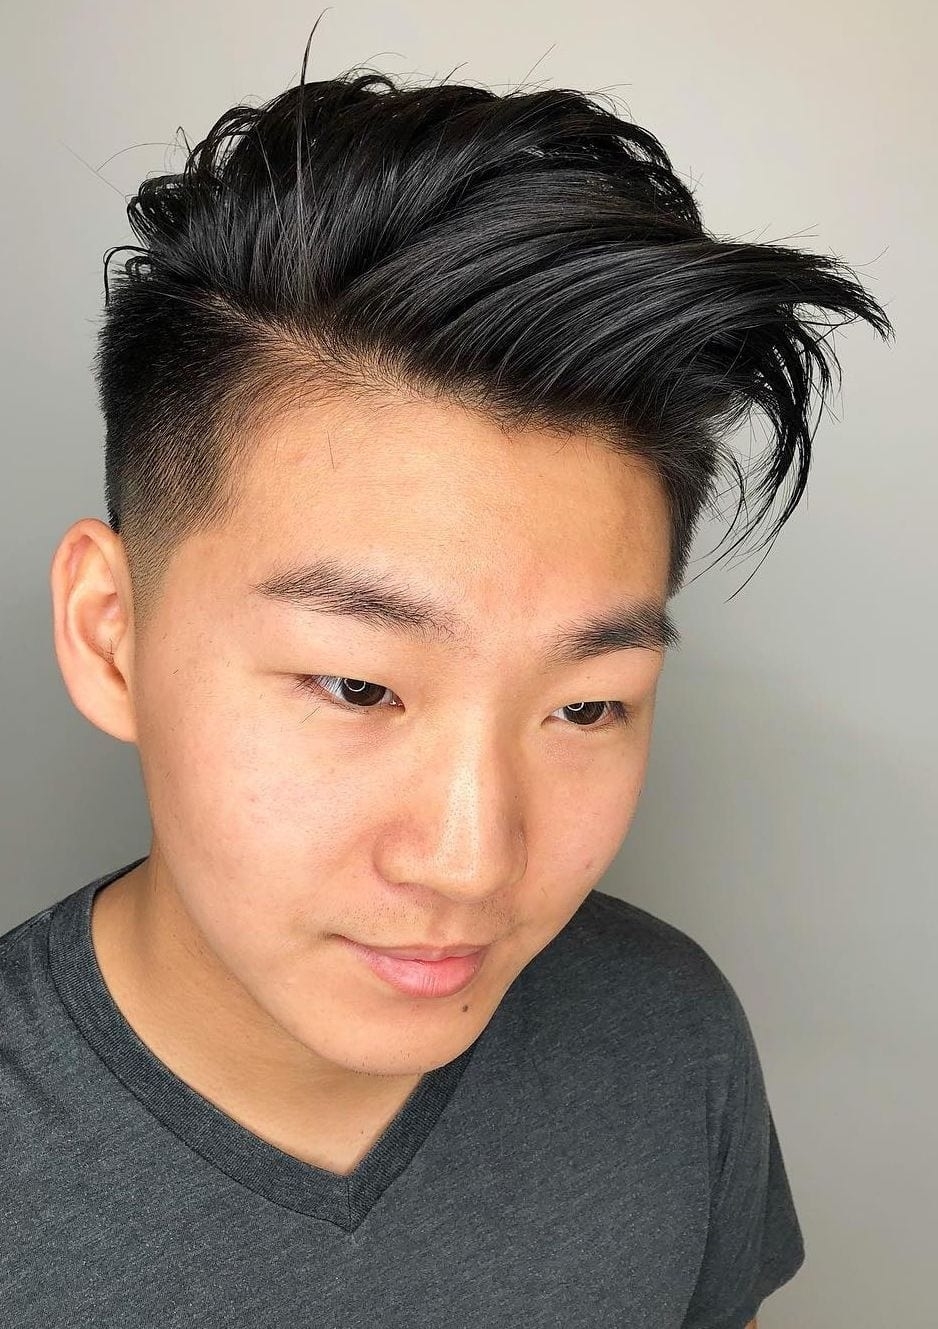 Top 30 Trendy Asian Men Hairstyles 2019 regarding The most ideal Asian Little Boy Hairstyles